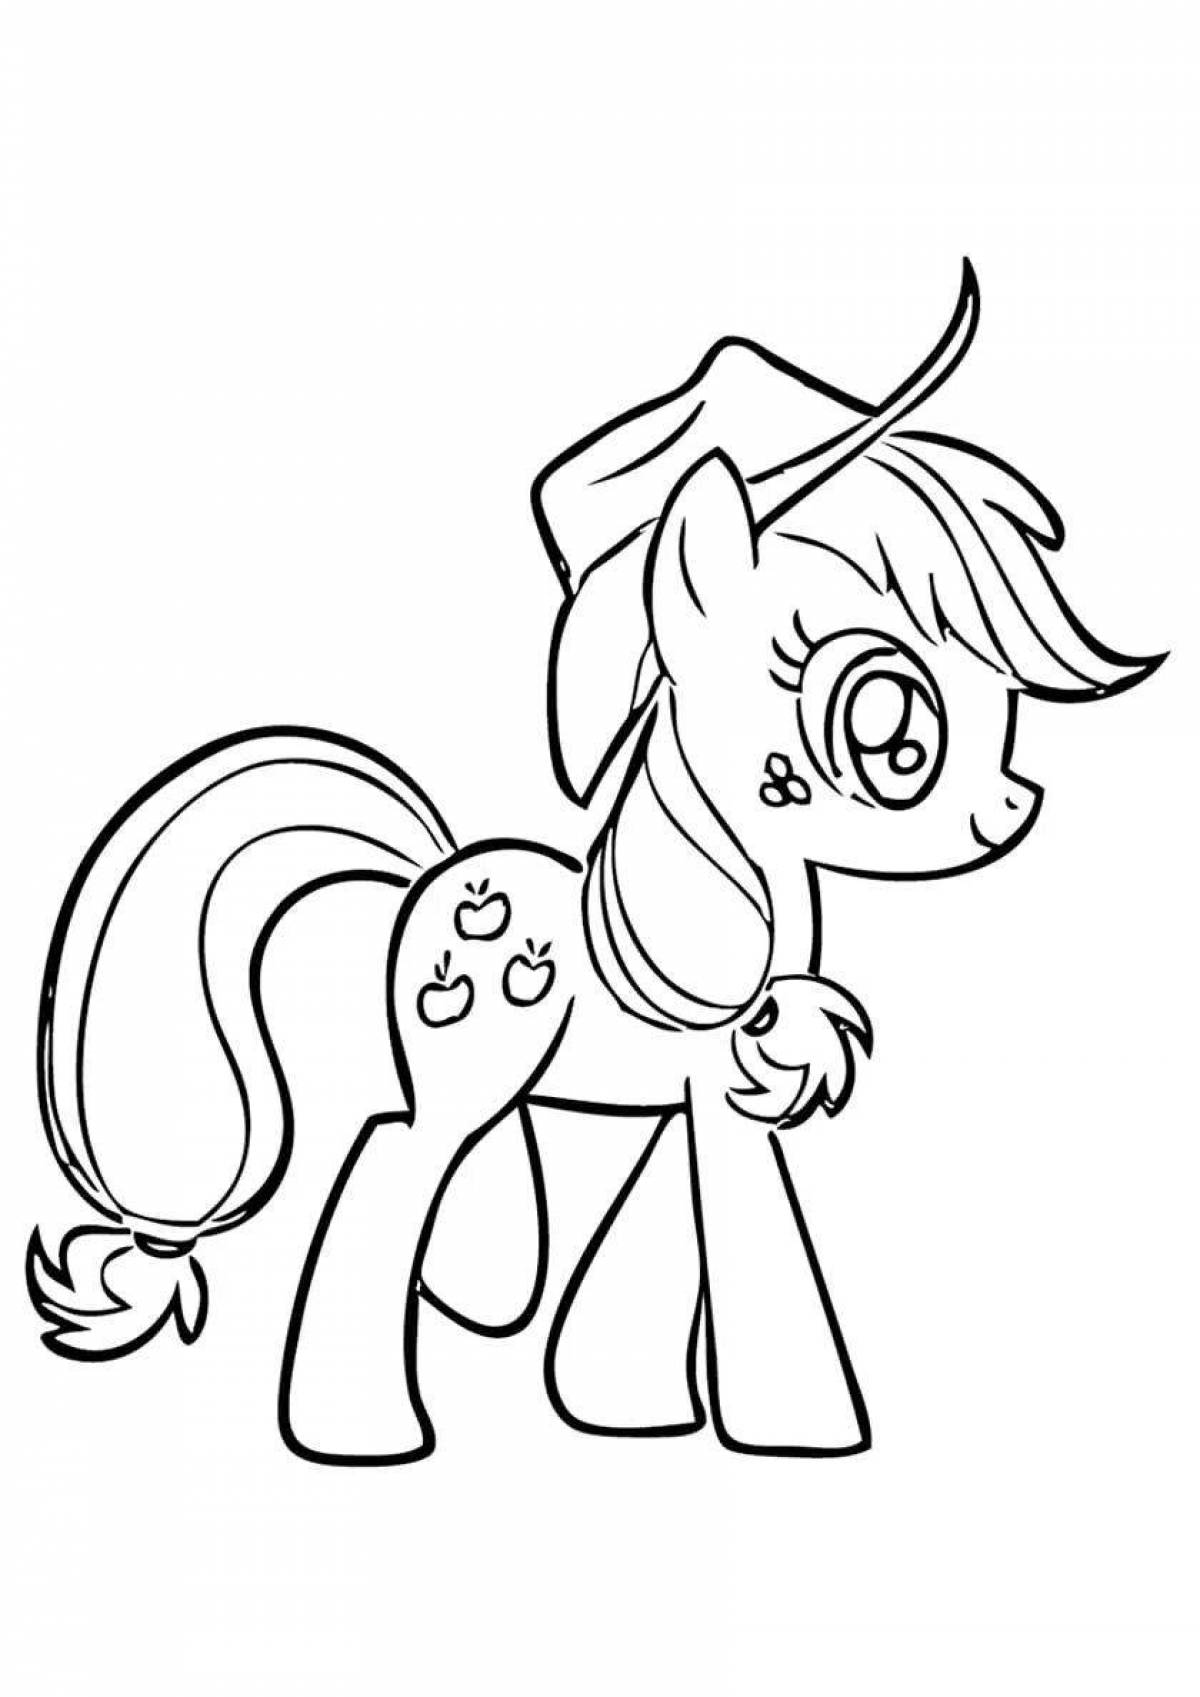 Charming pony applejack coloring page